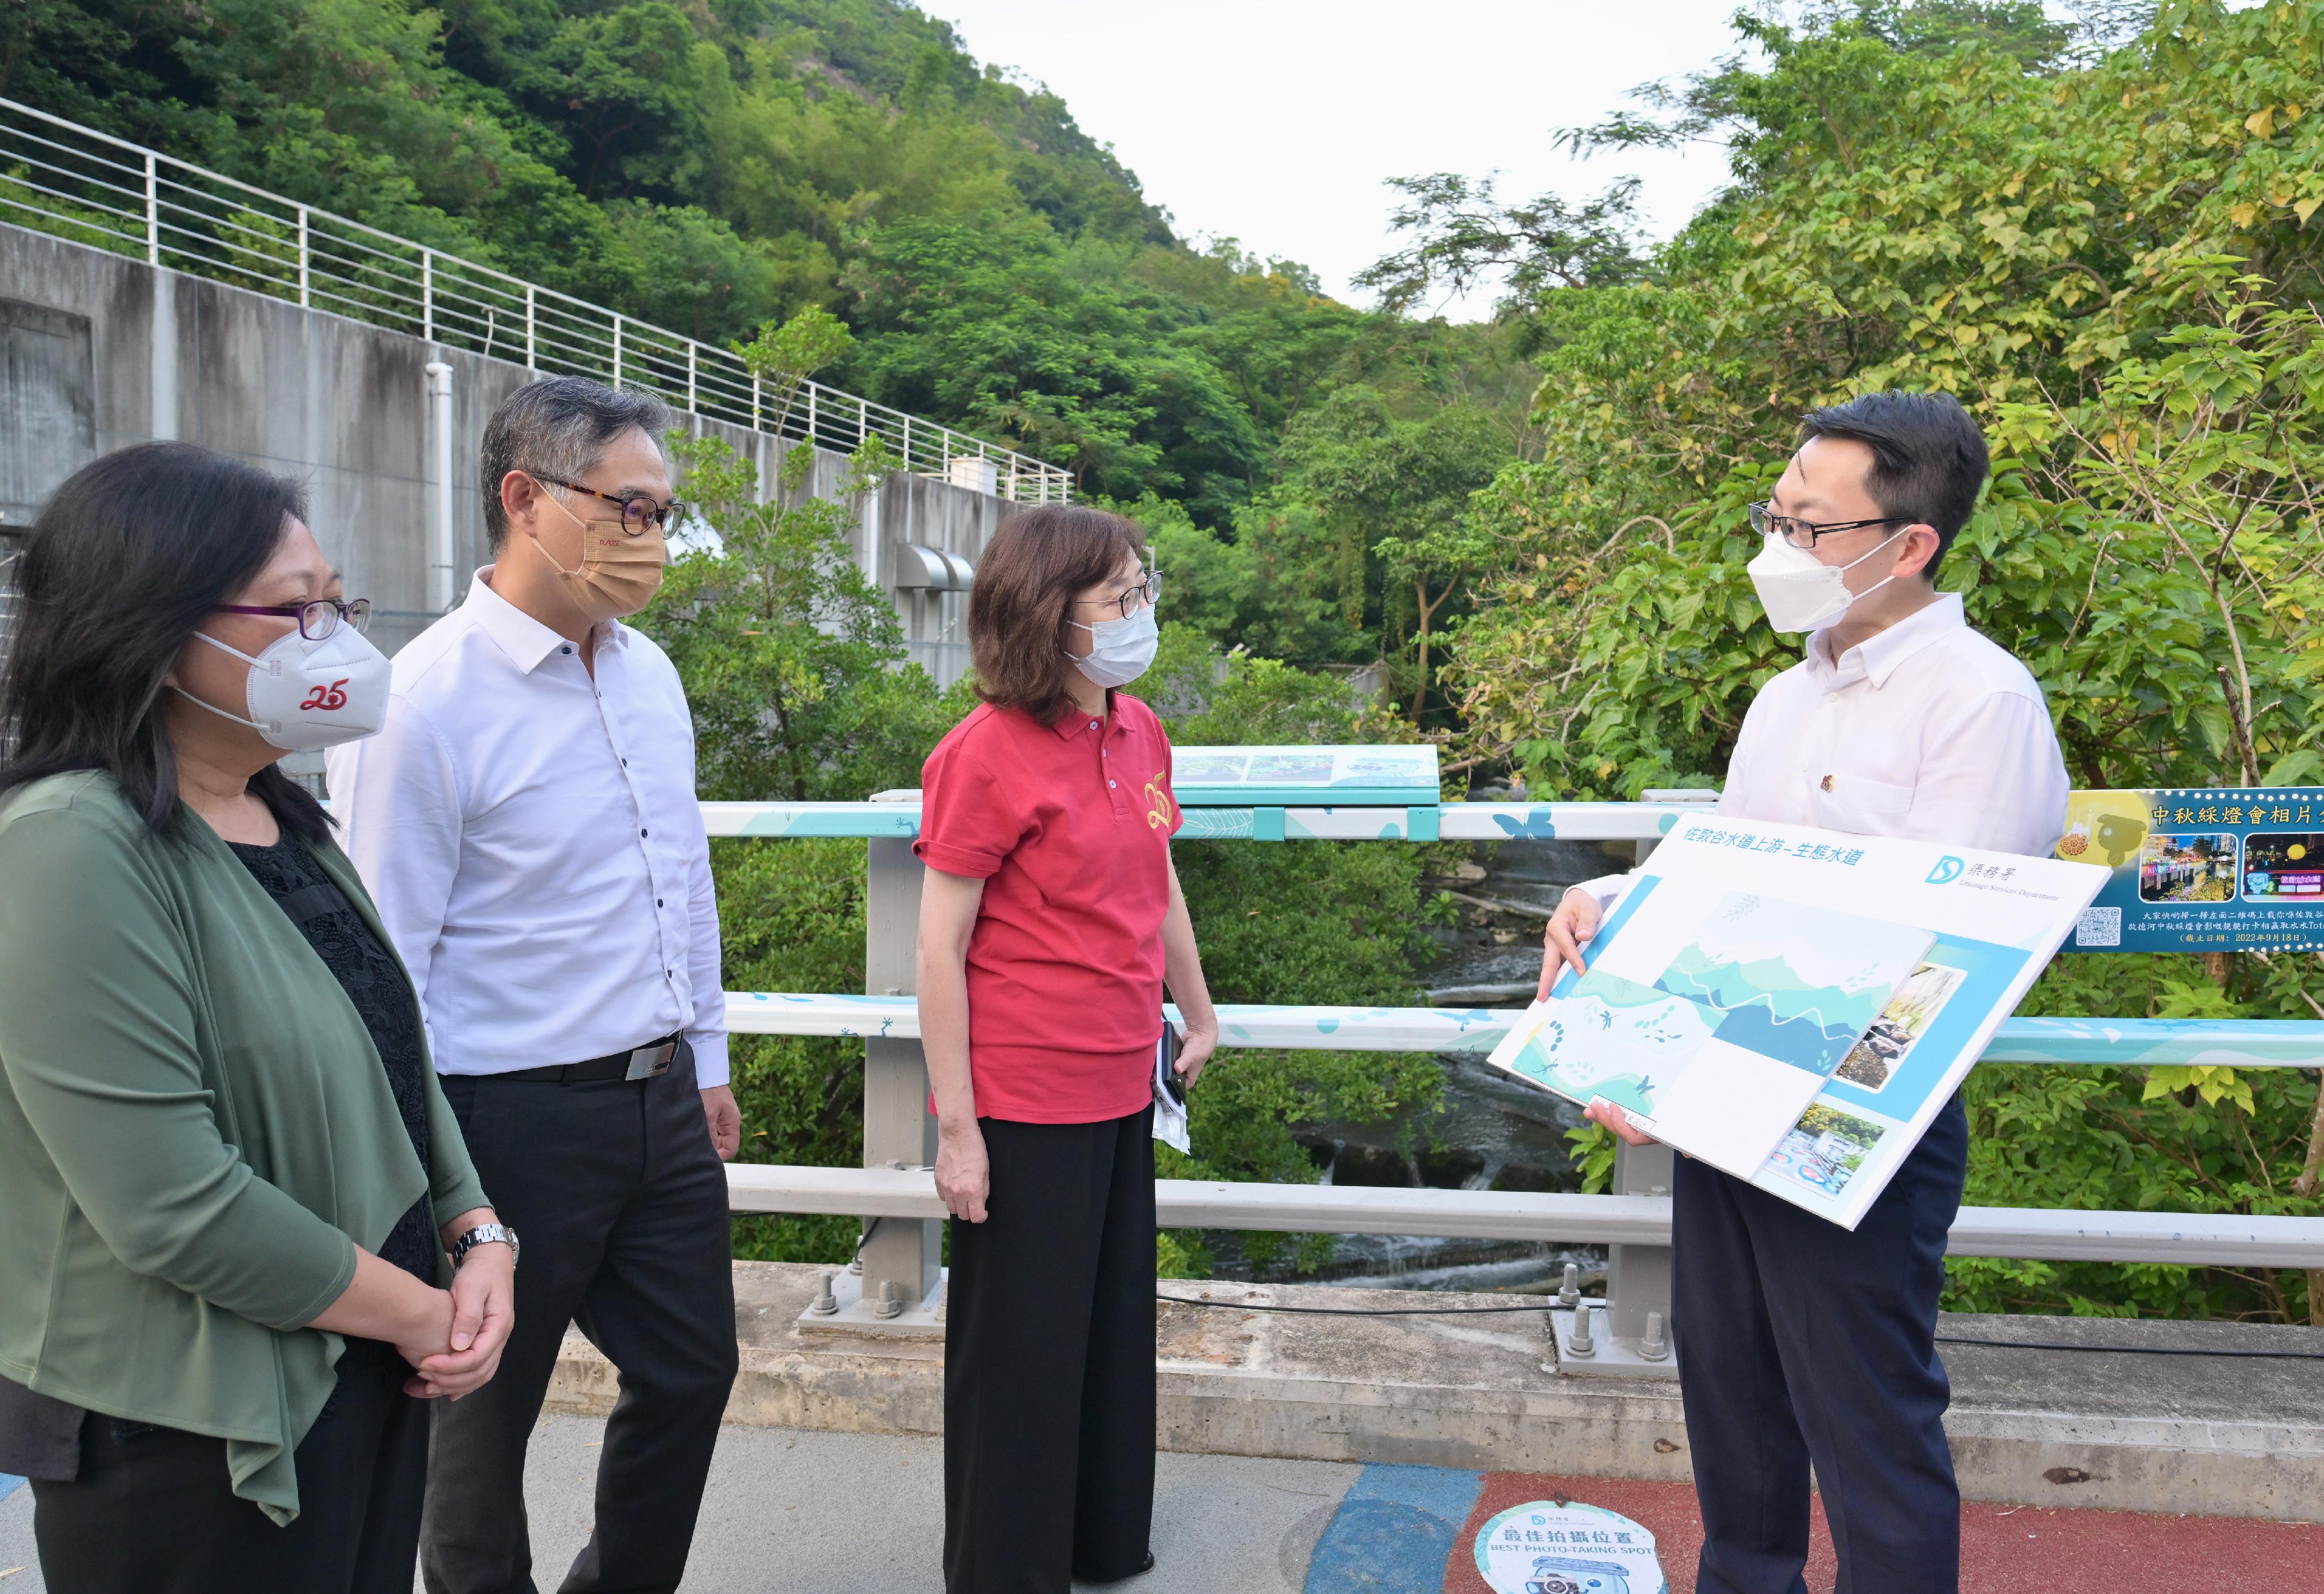 The Drainage Services Department (DSD) is holding a Mid-Autumn Lighting Festival at Jordan Valley Channel and Kai Tak River from today (September 5) to September 18. Photo shows the Secretary for Development, Ms Bernadette Linn (third left), receiving a briefing on the Revitalisation Works of Jordan Valley Nullah by an officer of the DSD. Looking on are the Permanent Secretary for Development (Works), Mr Ricky Lau (second left); and the Director of Drainage Services, Ms Alice Pang (first left).